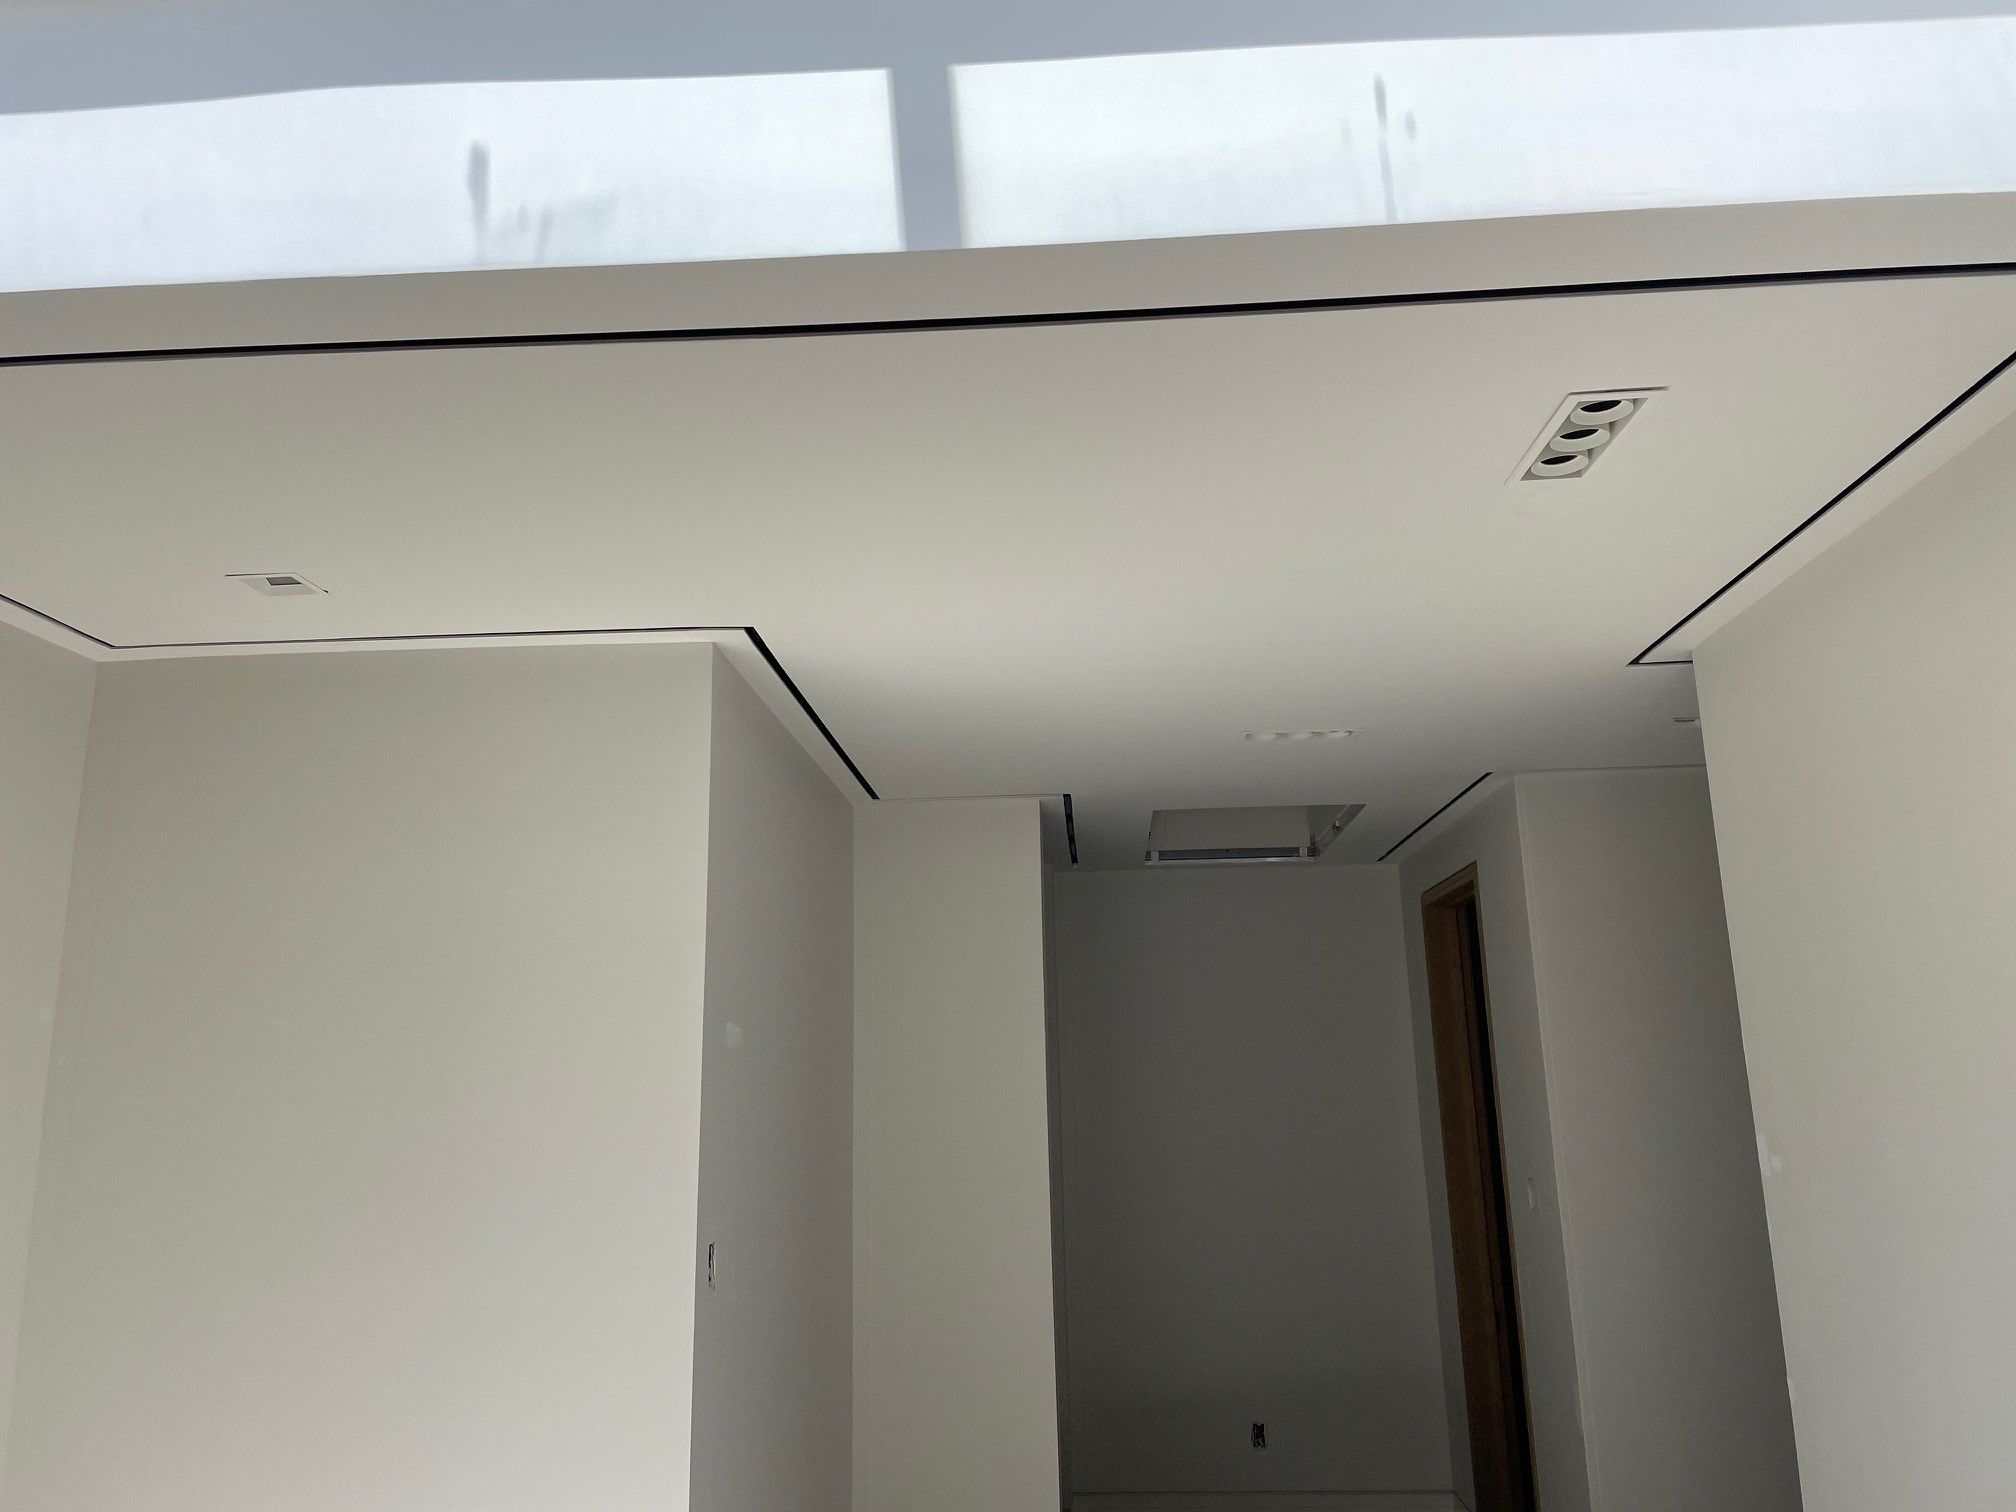 Concealed Duct Work / Vents